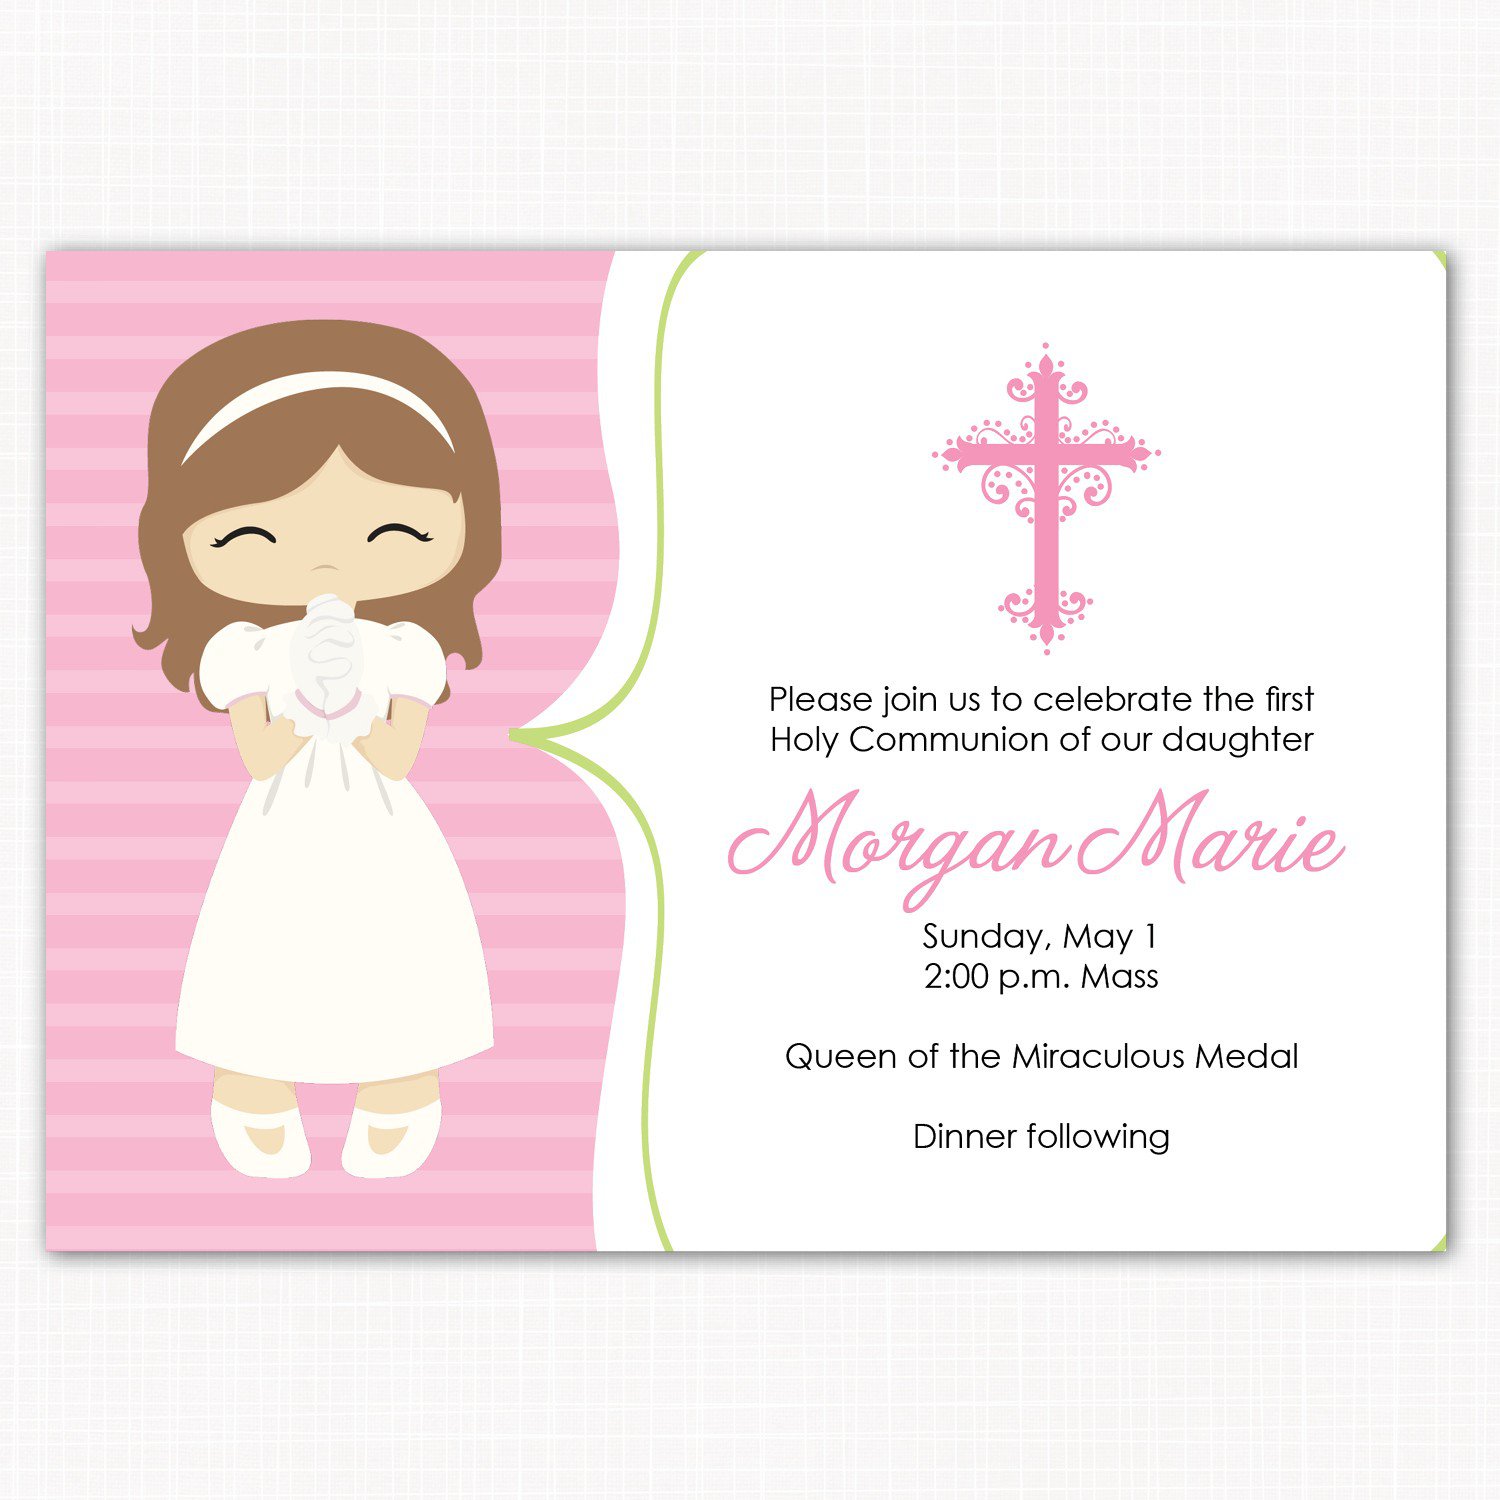 Samples Of First Communion Invitations In Spanish